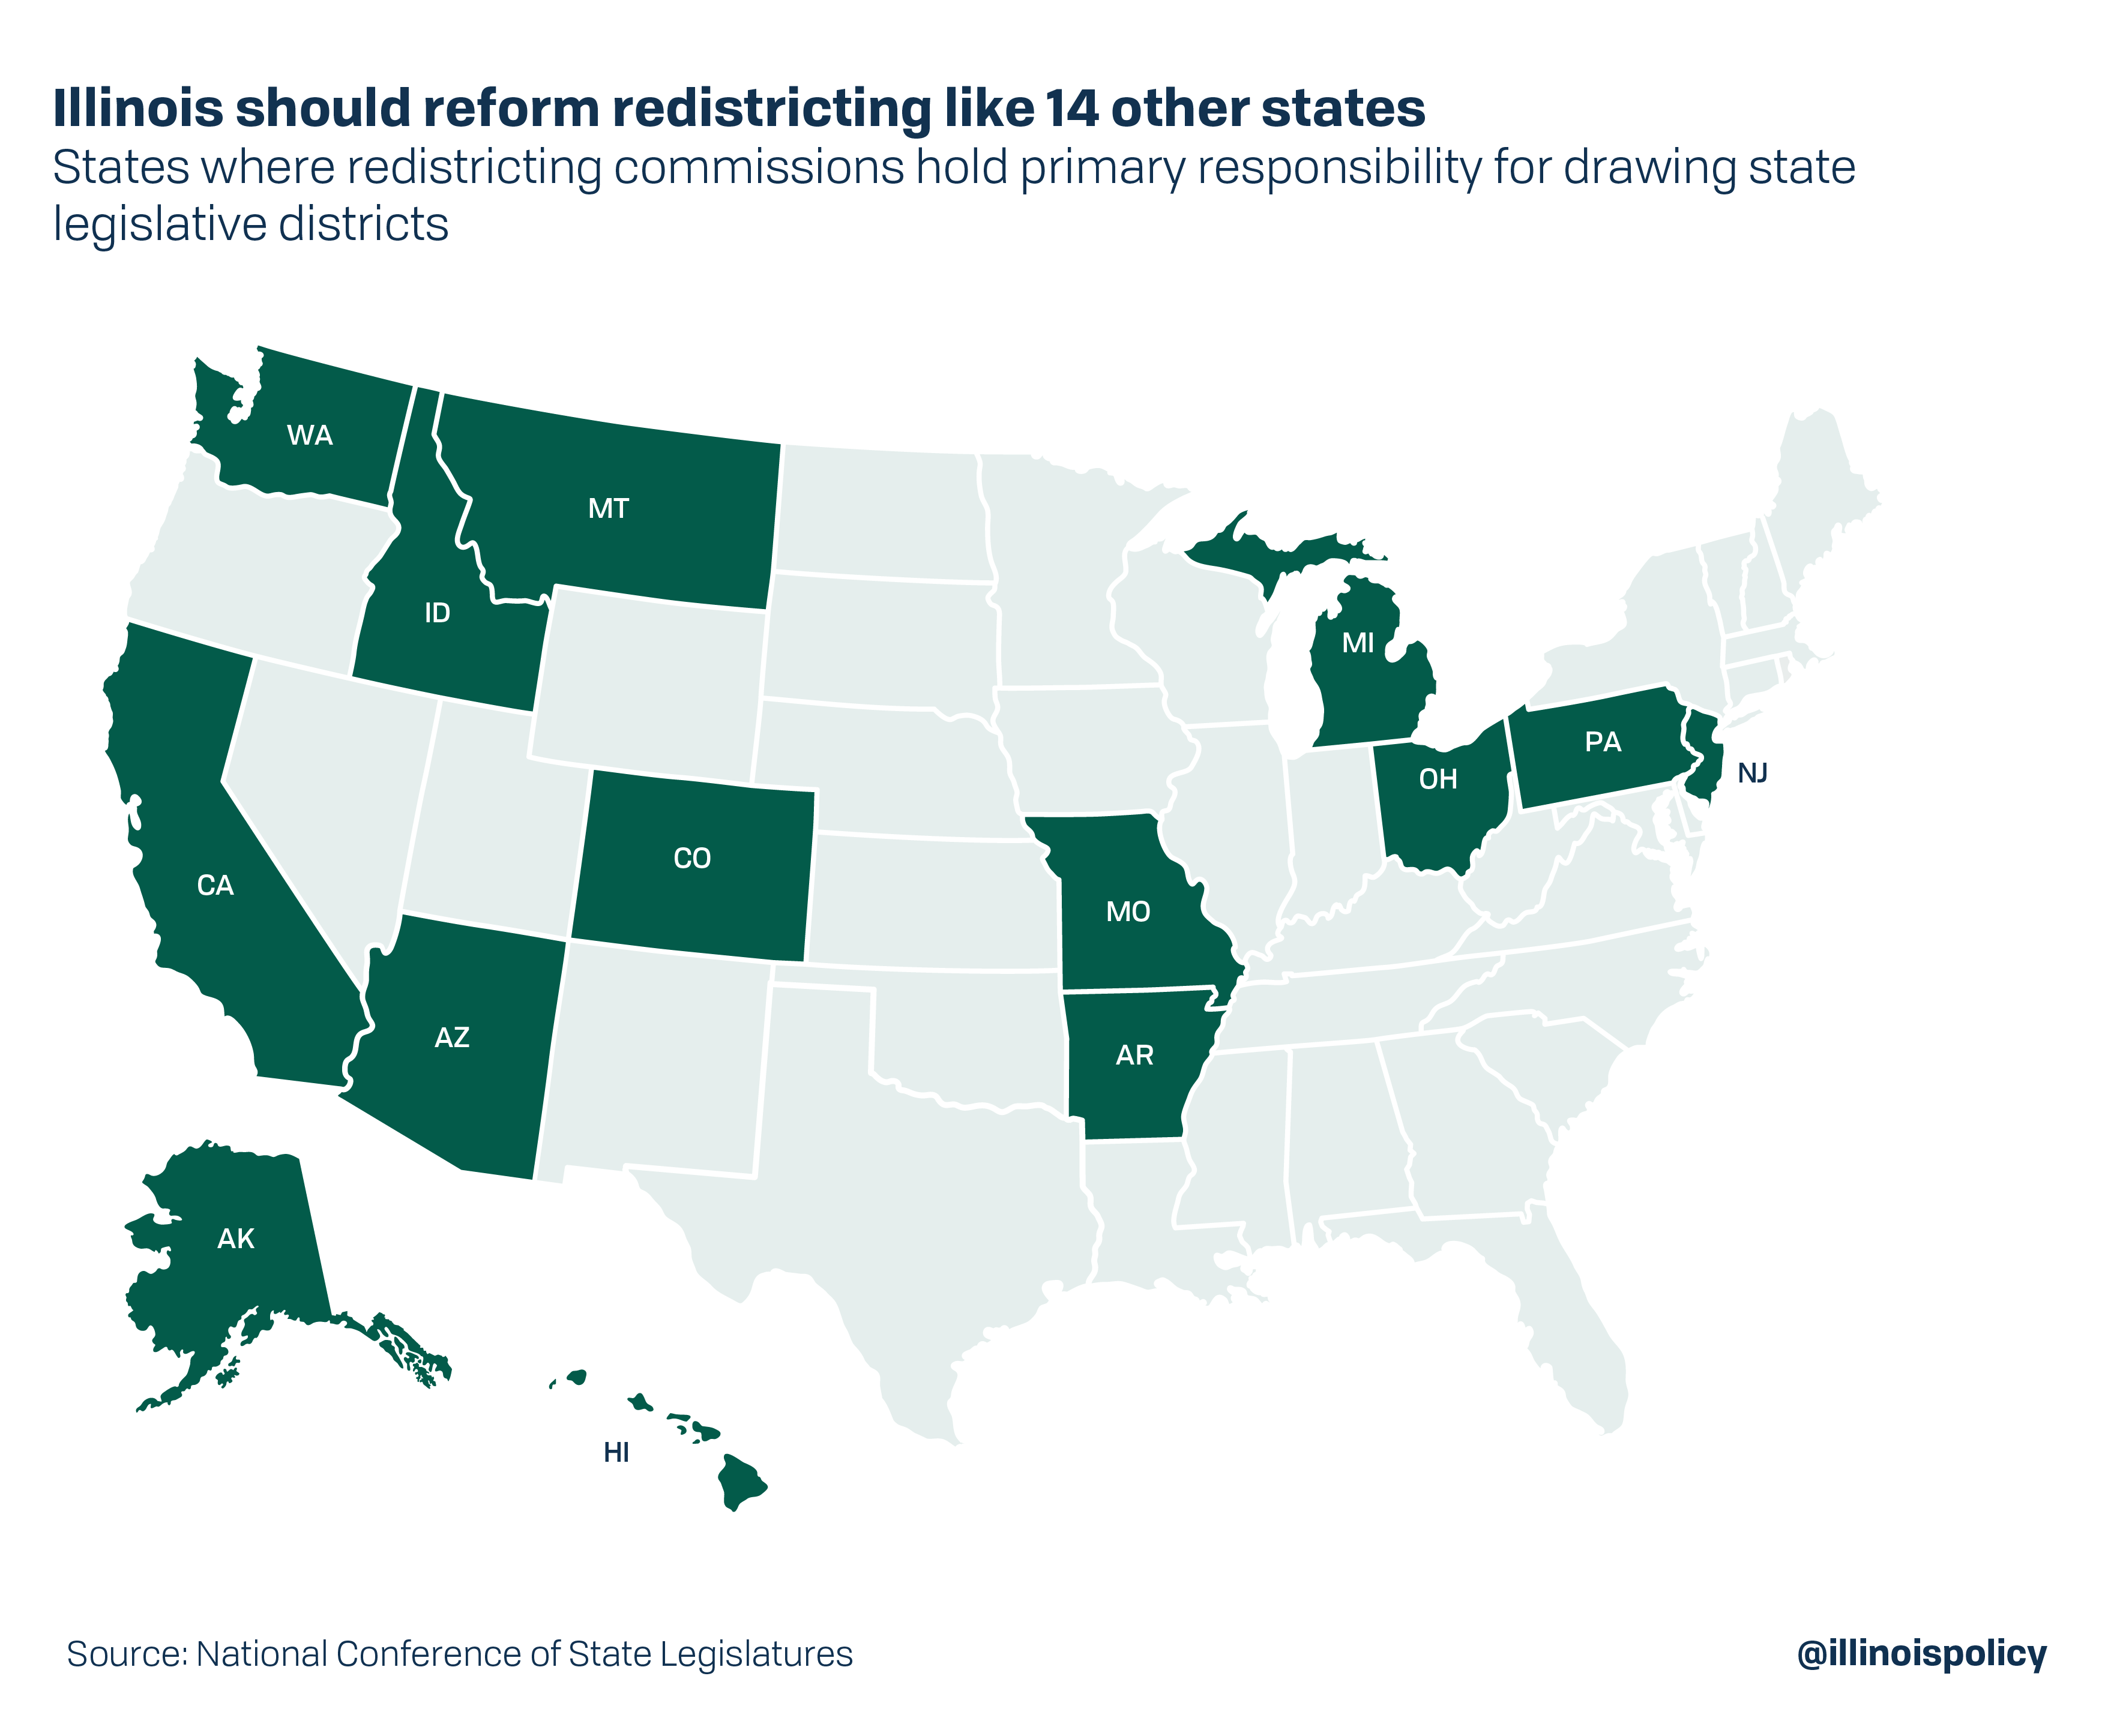 Illinois should reform redistricting like 14 other states